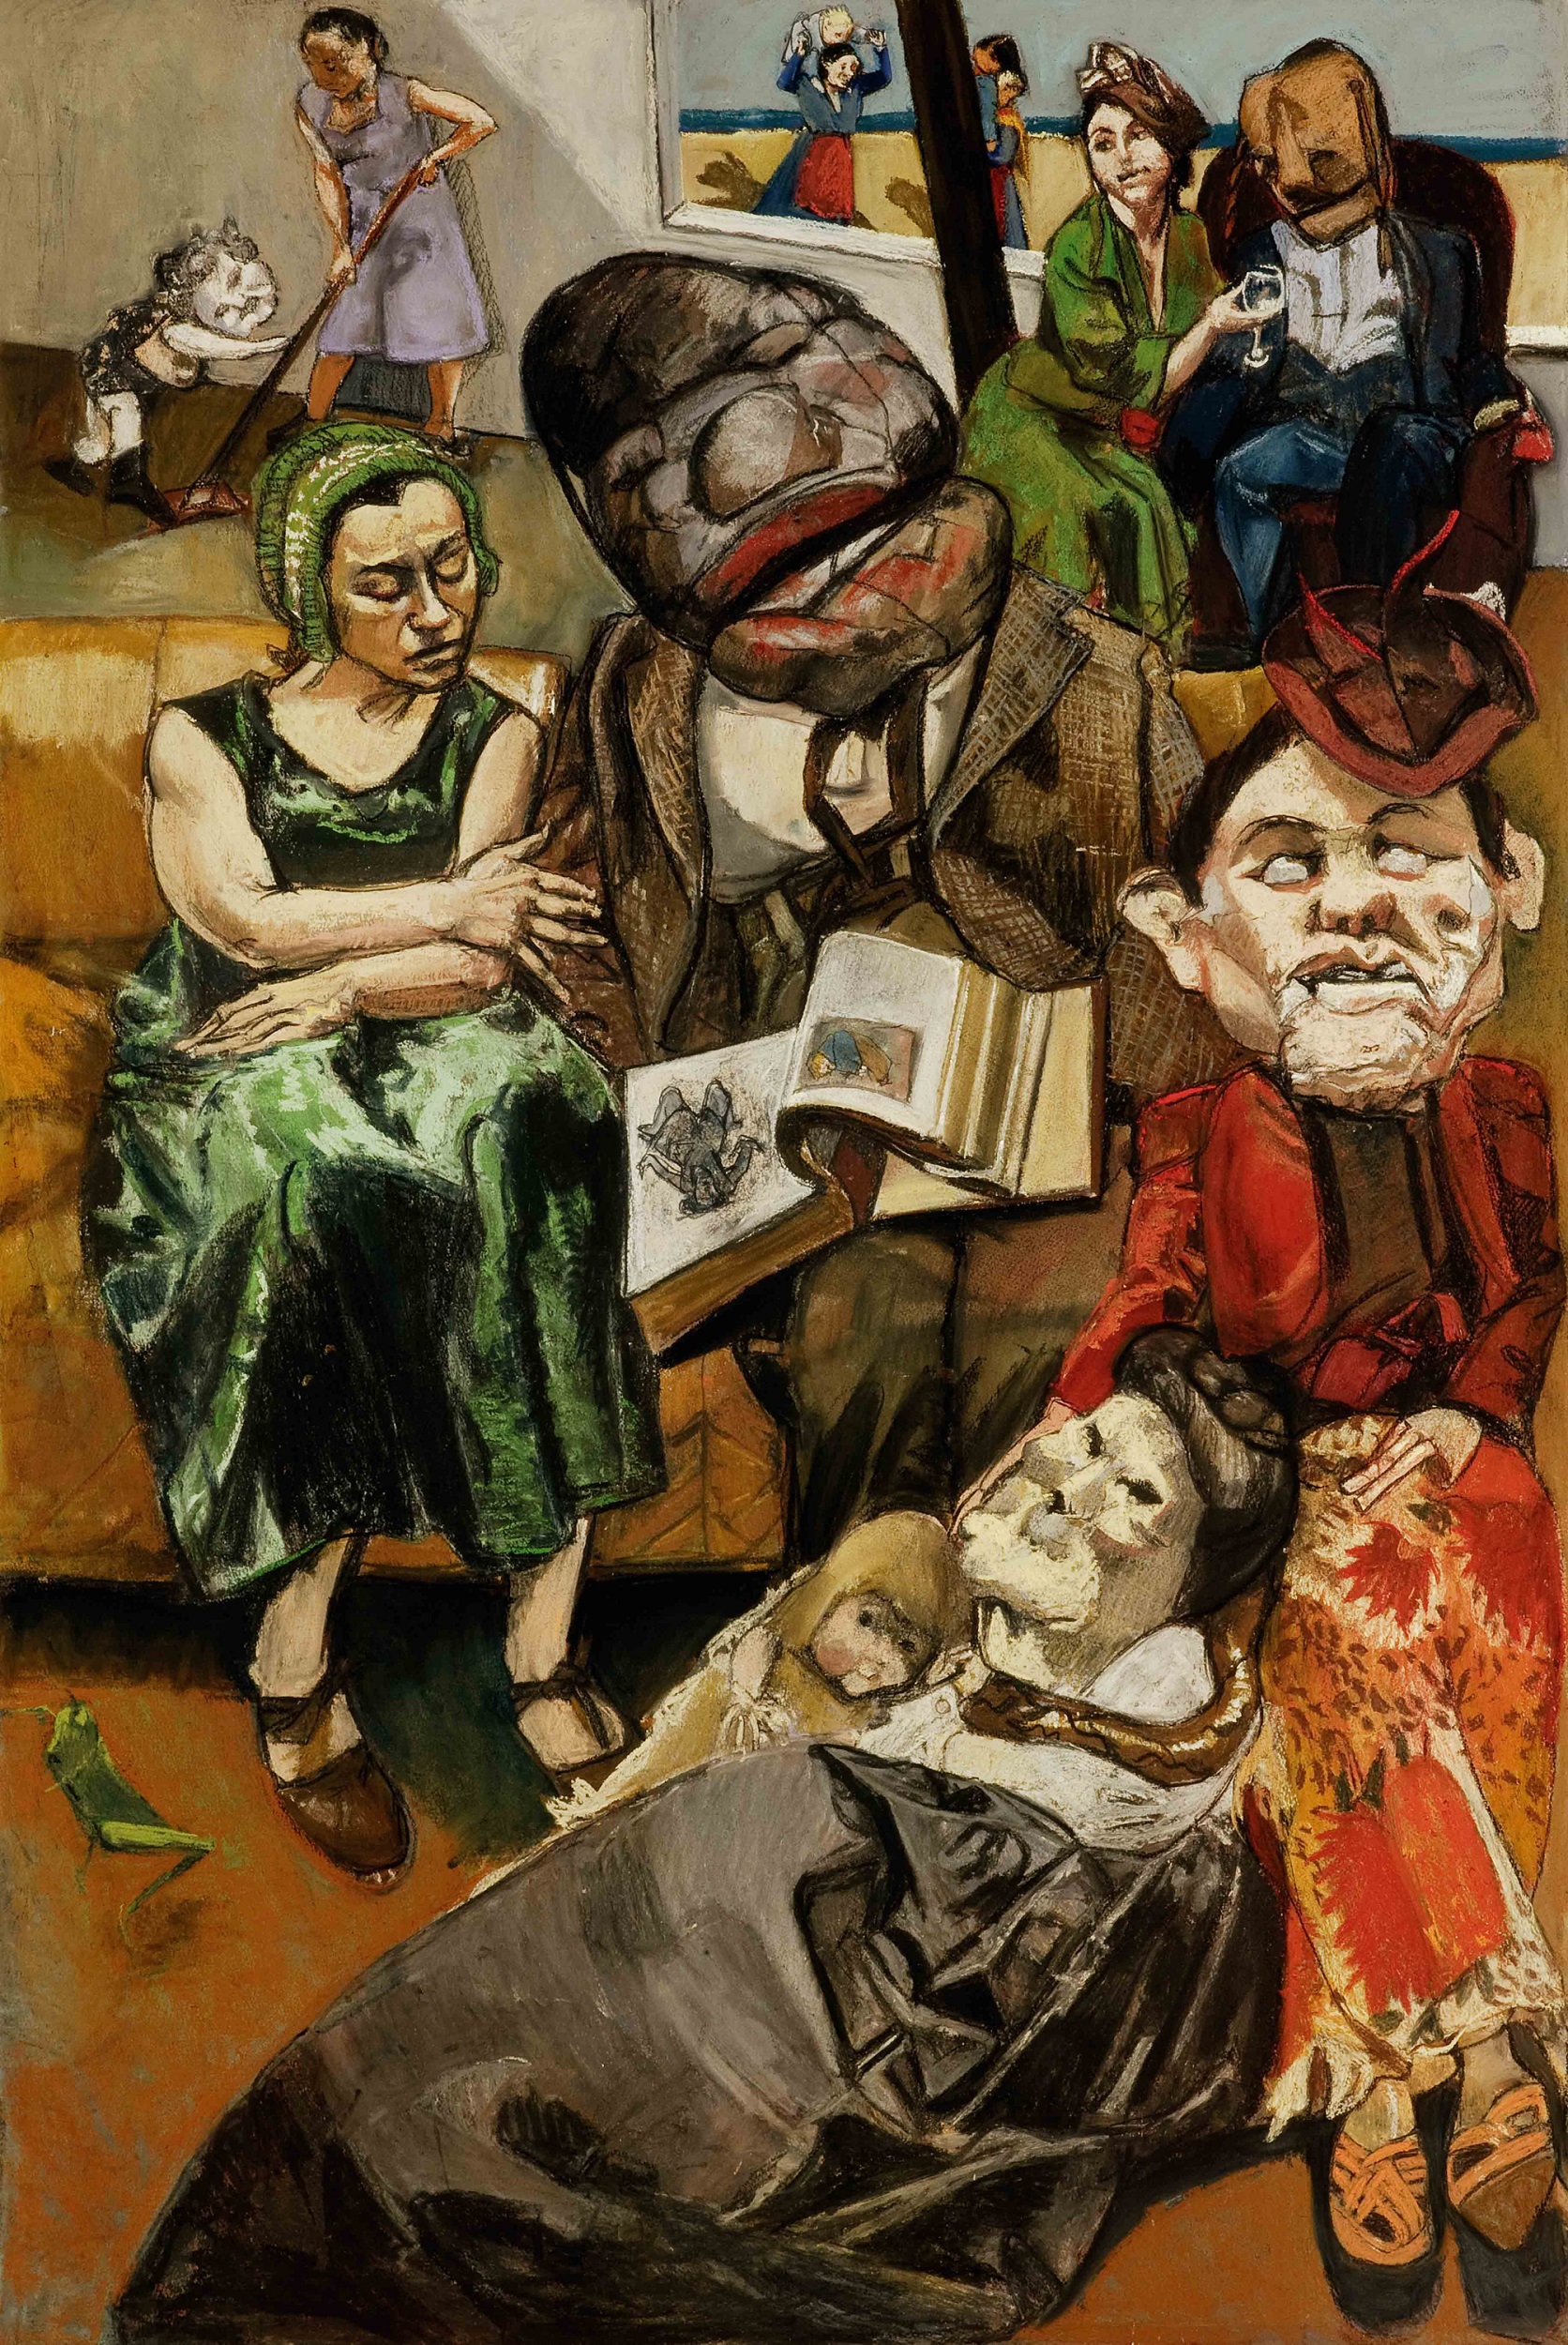 Paula Rego Reading the Divine Comedy by Dante, 2005 Pastel on paper on aluminium 180 x 120 cm 70 7/8 x 47 1/4 in © Paula Rego Courtesy the artist and Victoria Miro